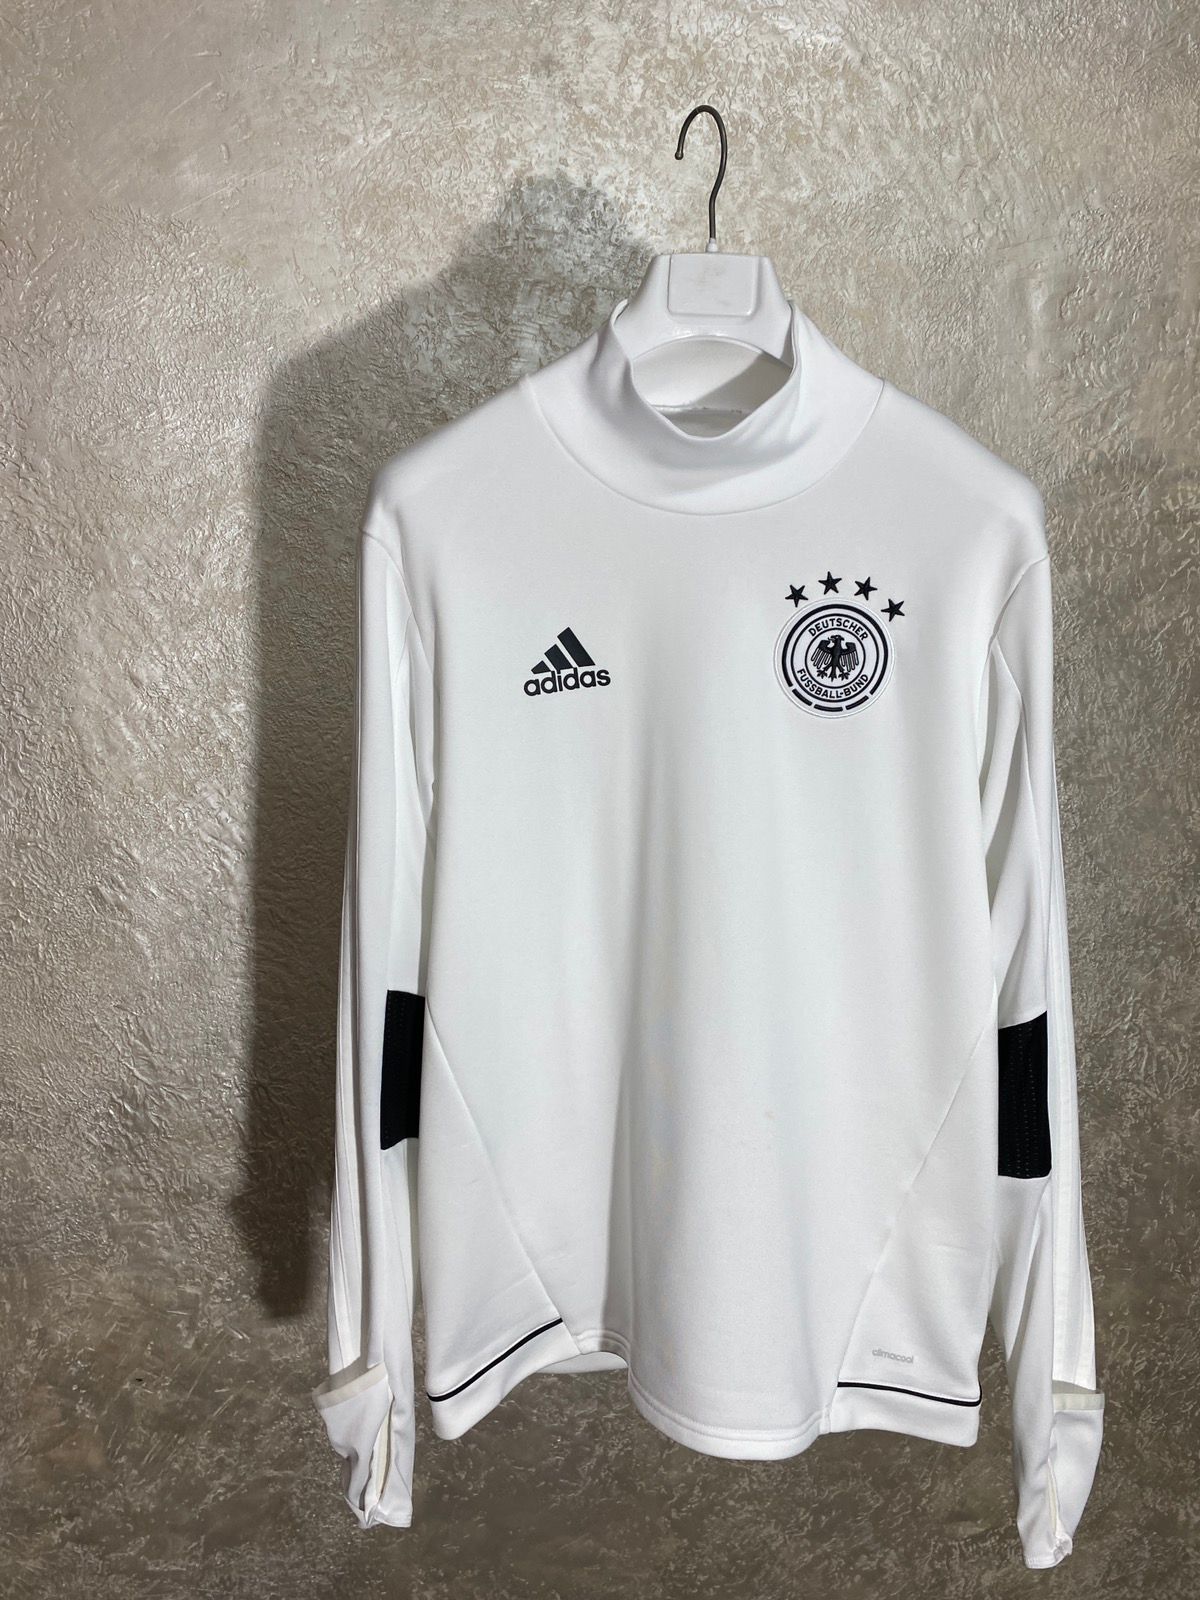 Pre-owned Adidas X Soccer Jersey Blokecore Germany 2010s Football Sweatshirt Turtleneck In White